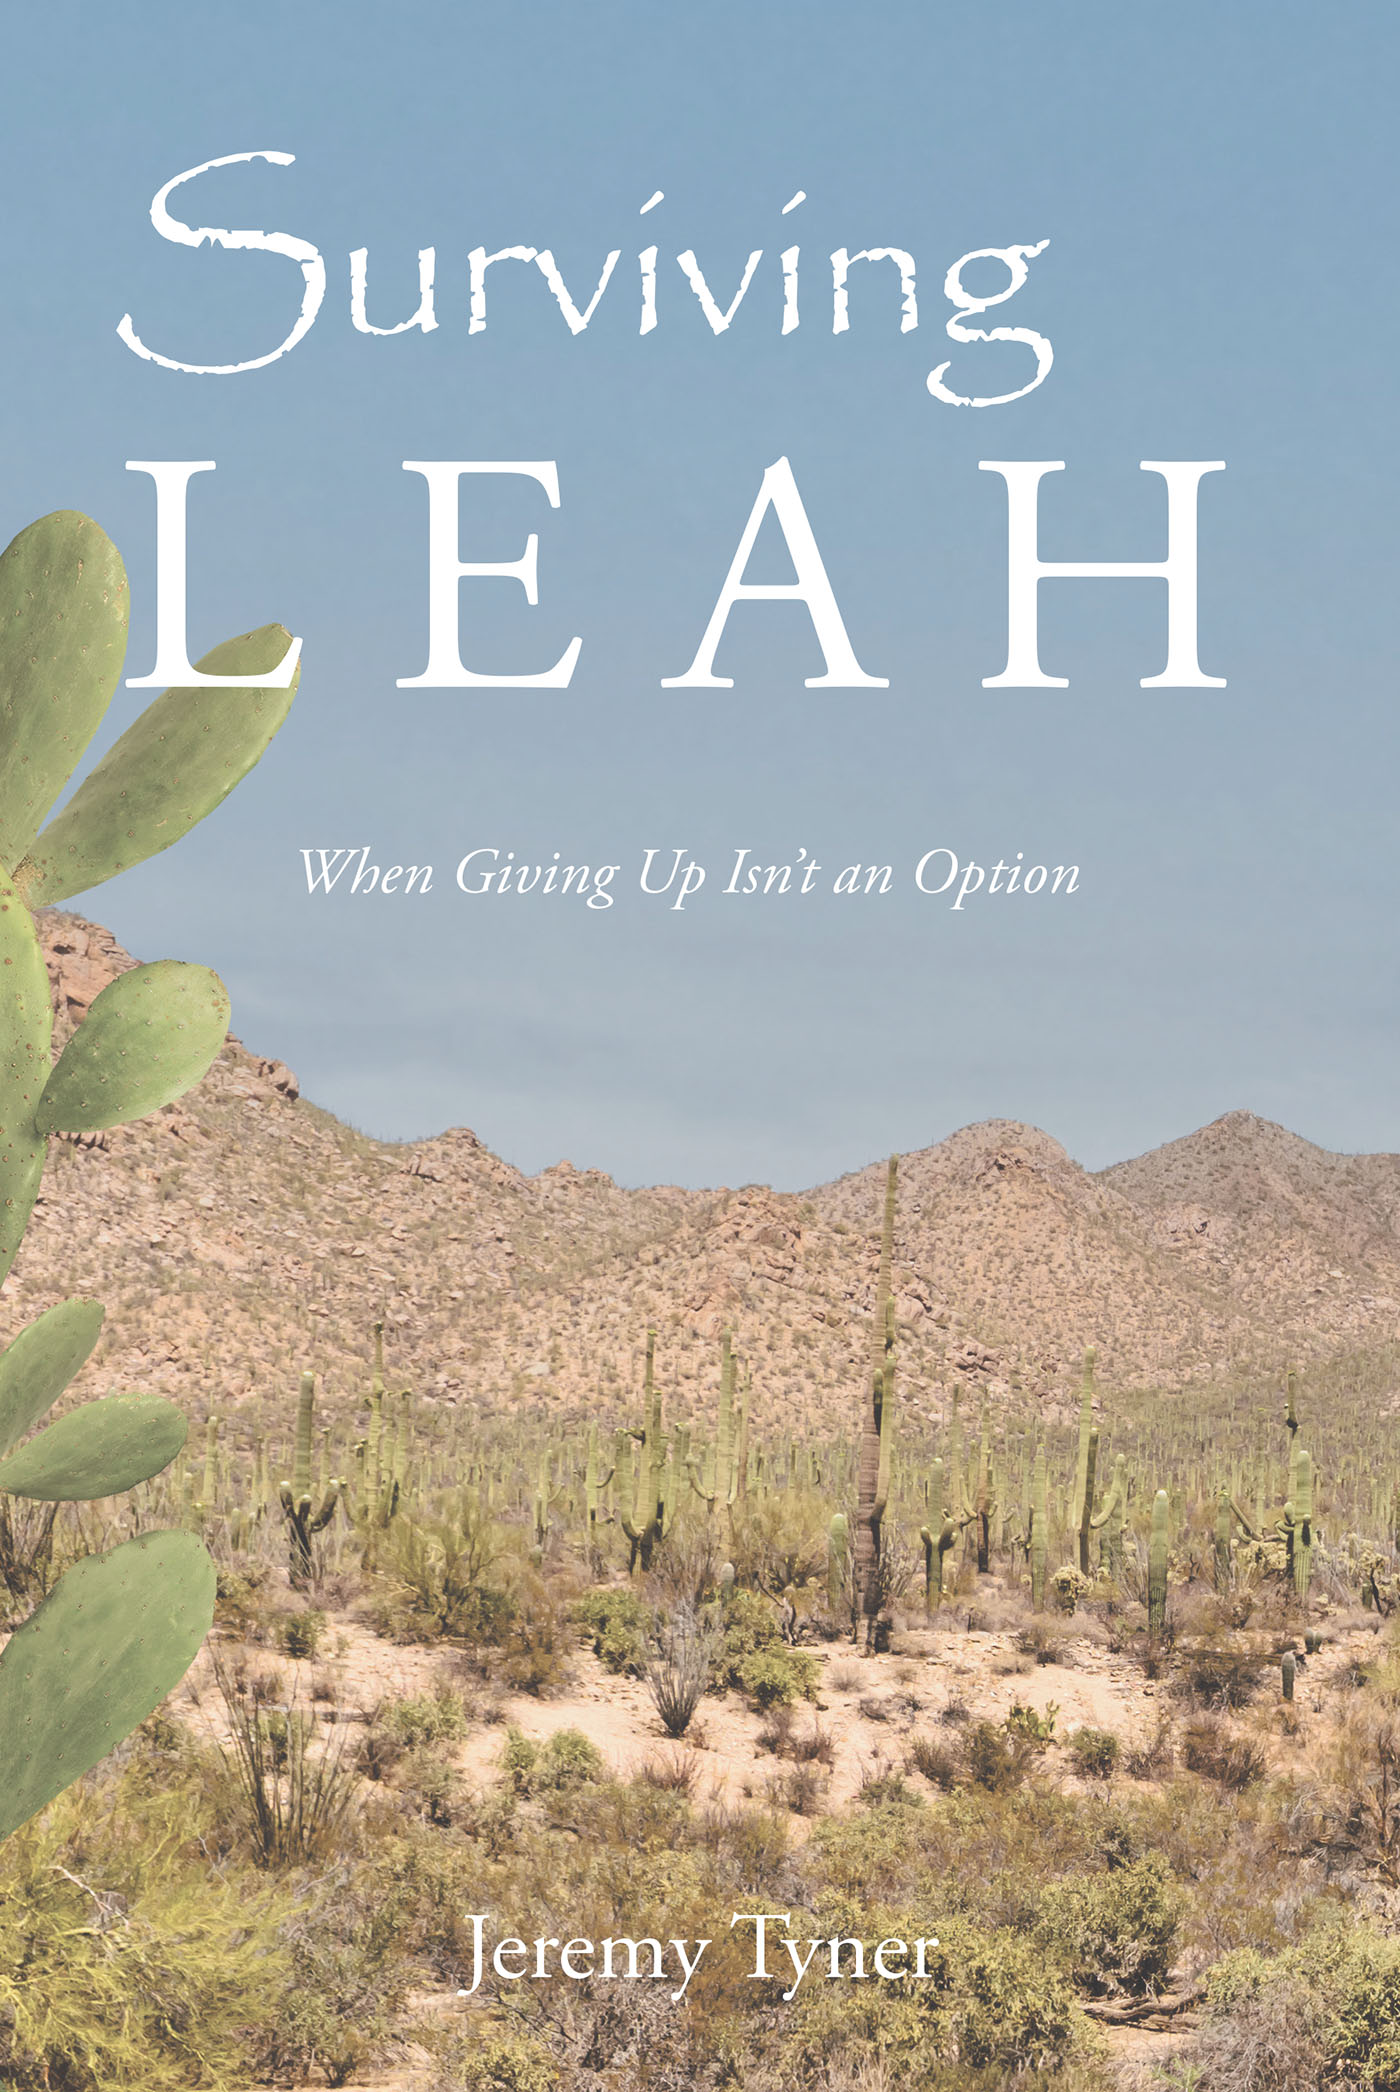 Jeremy Tyner’s Newly Released "Surviving Leah: When Giving Up Isn’t an Option" is an Empowering Discussion of Overcoming Life’s Stumbling Blocks